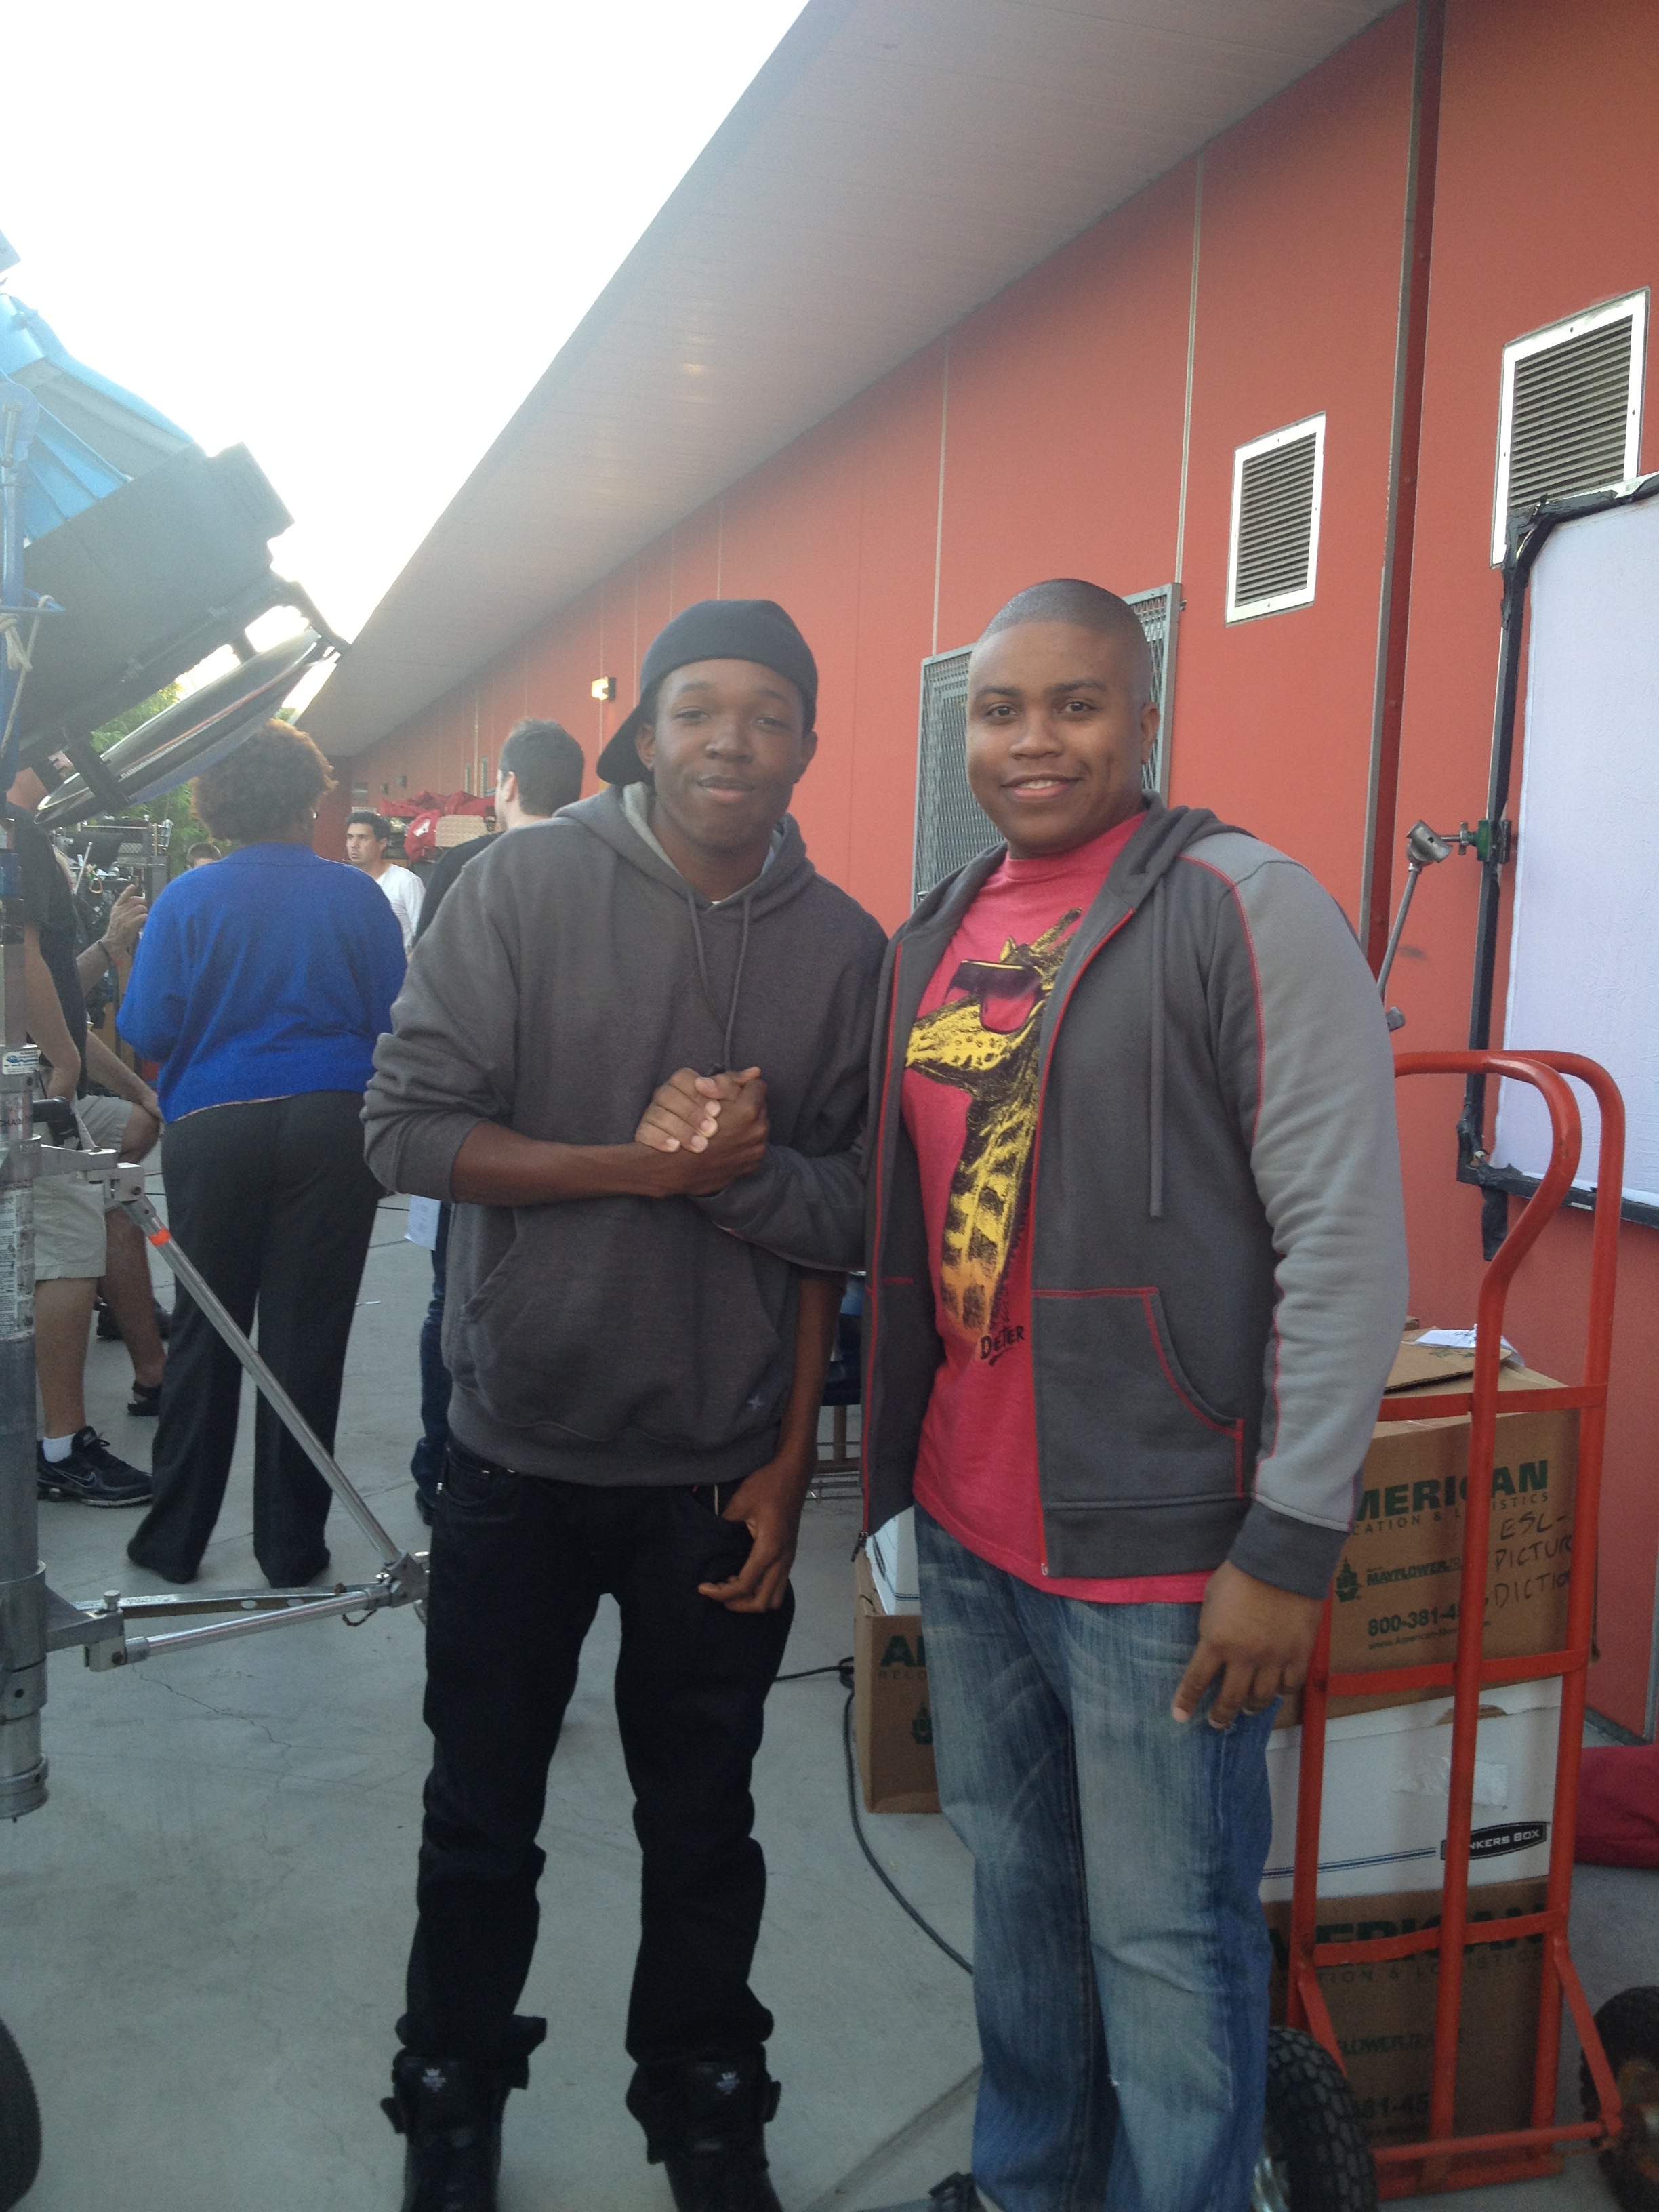 Victor Kelso and Denzel Whitaker